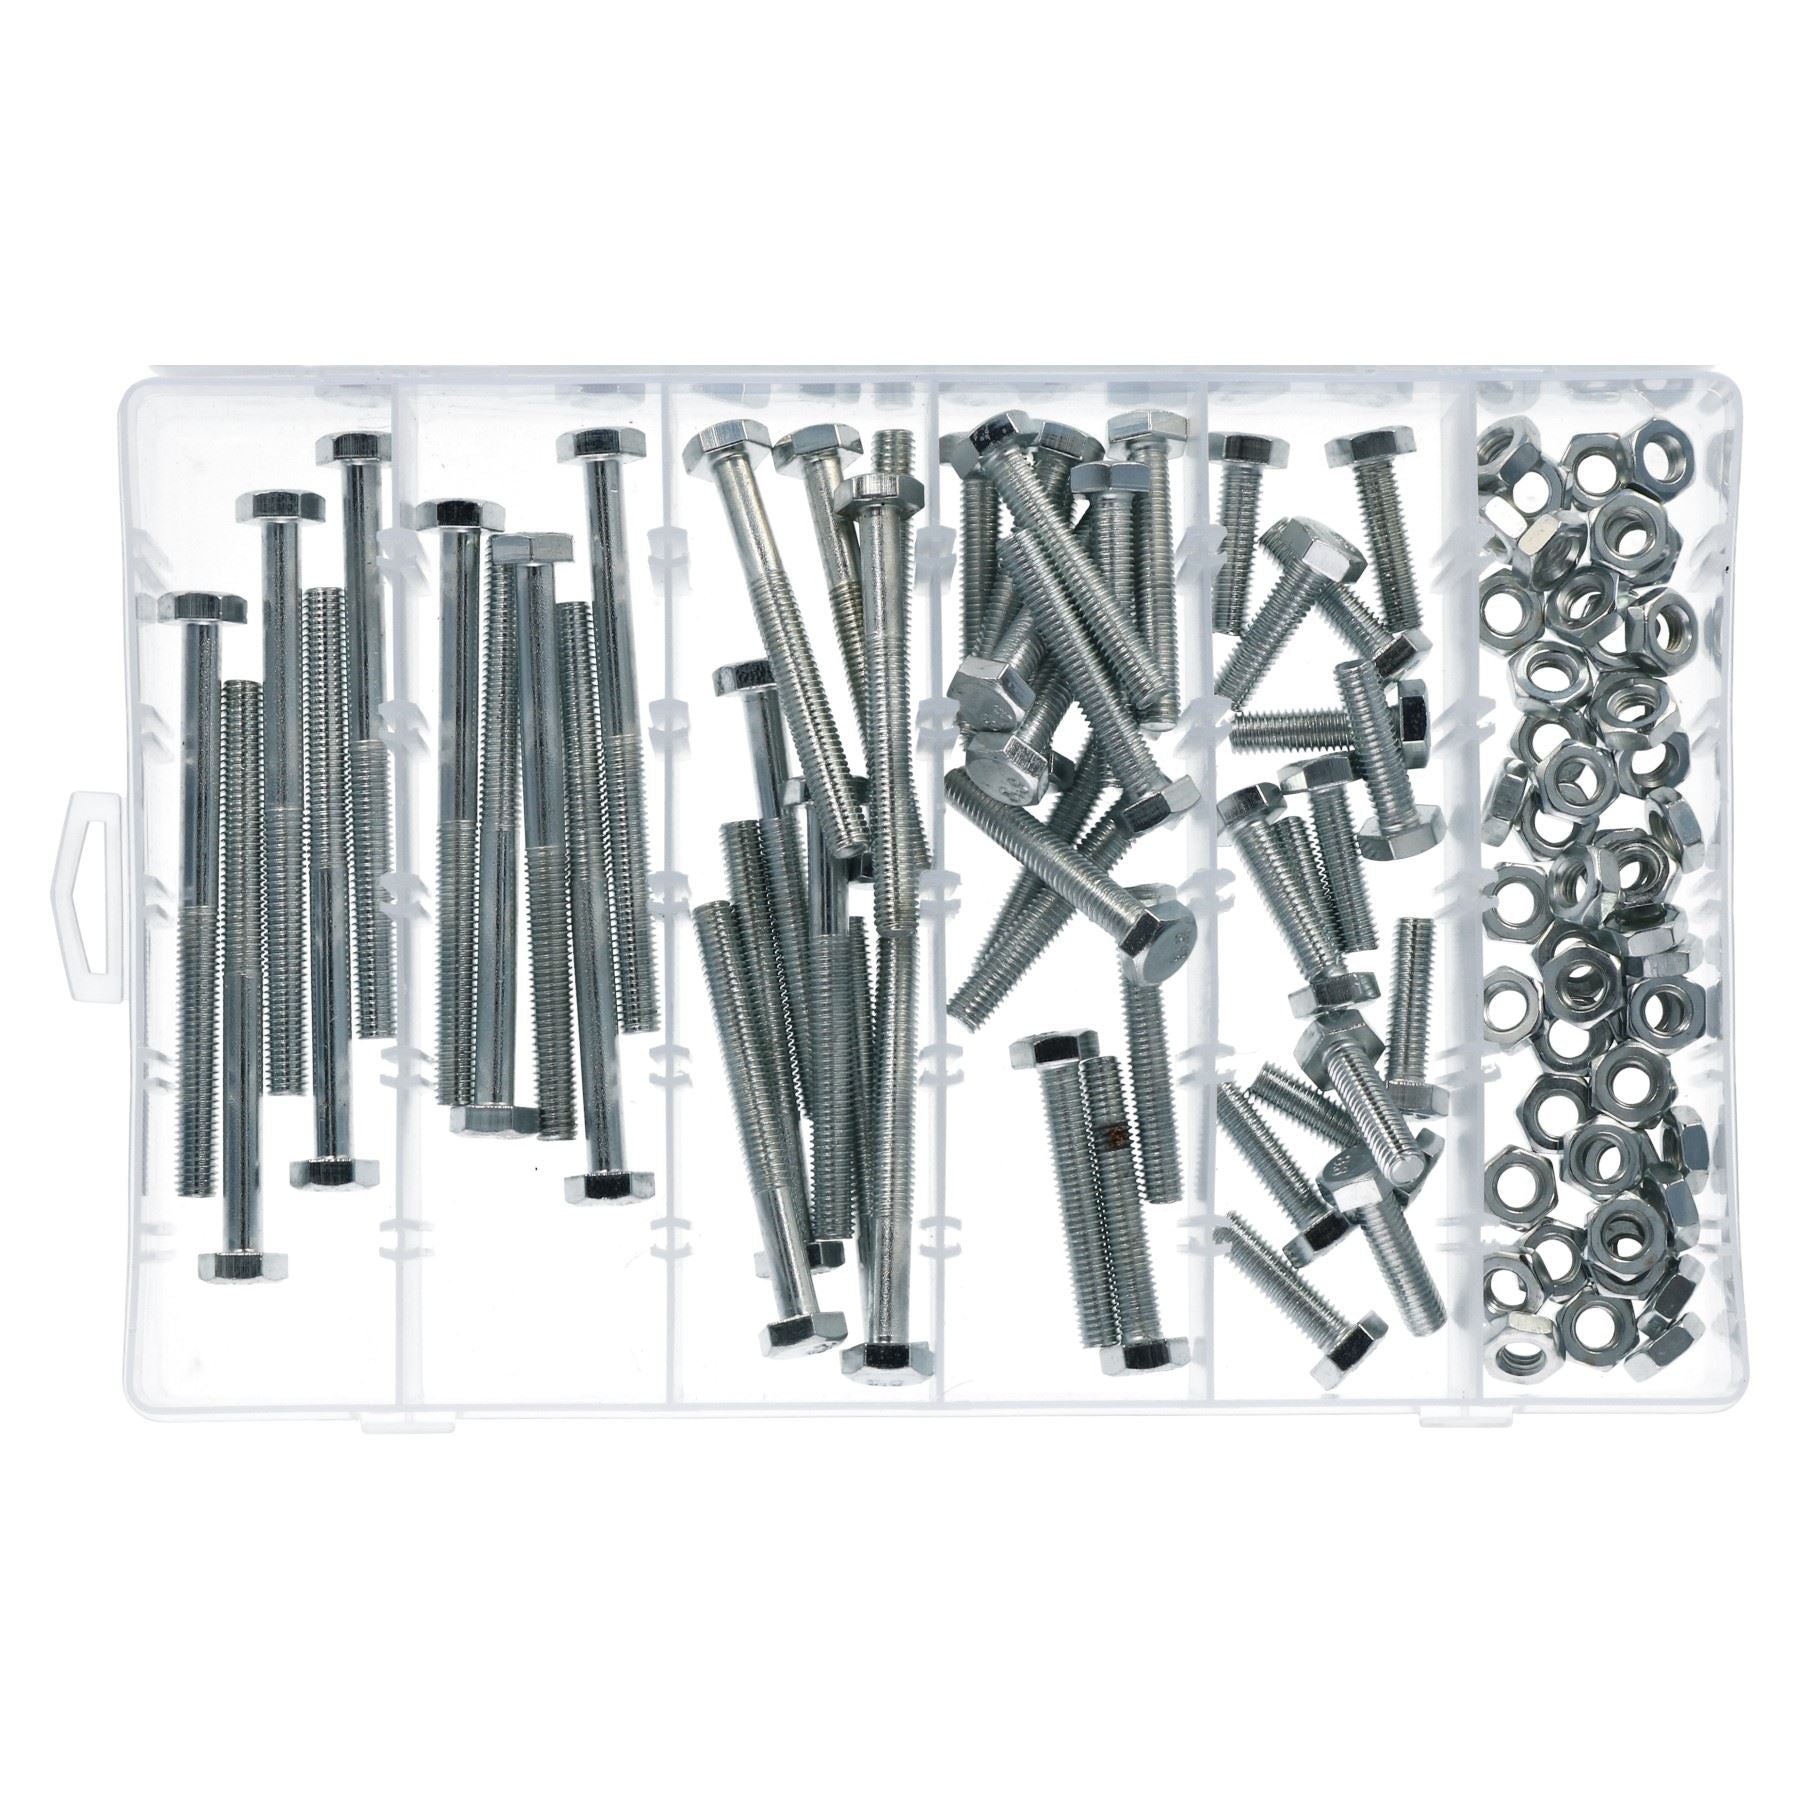 100pc M8 8mm Bolts Bolt with Nuts Assortment 30 - 100mm Hex Head